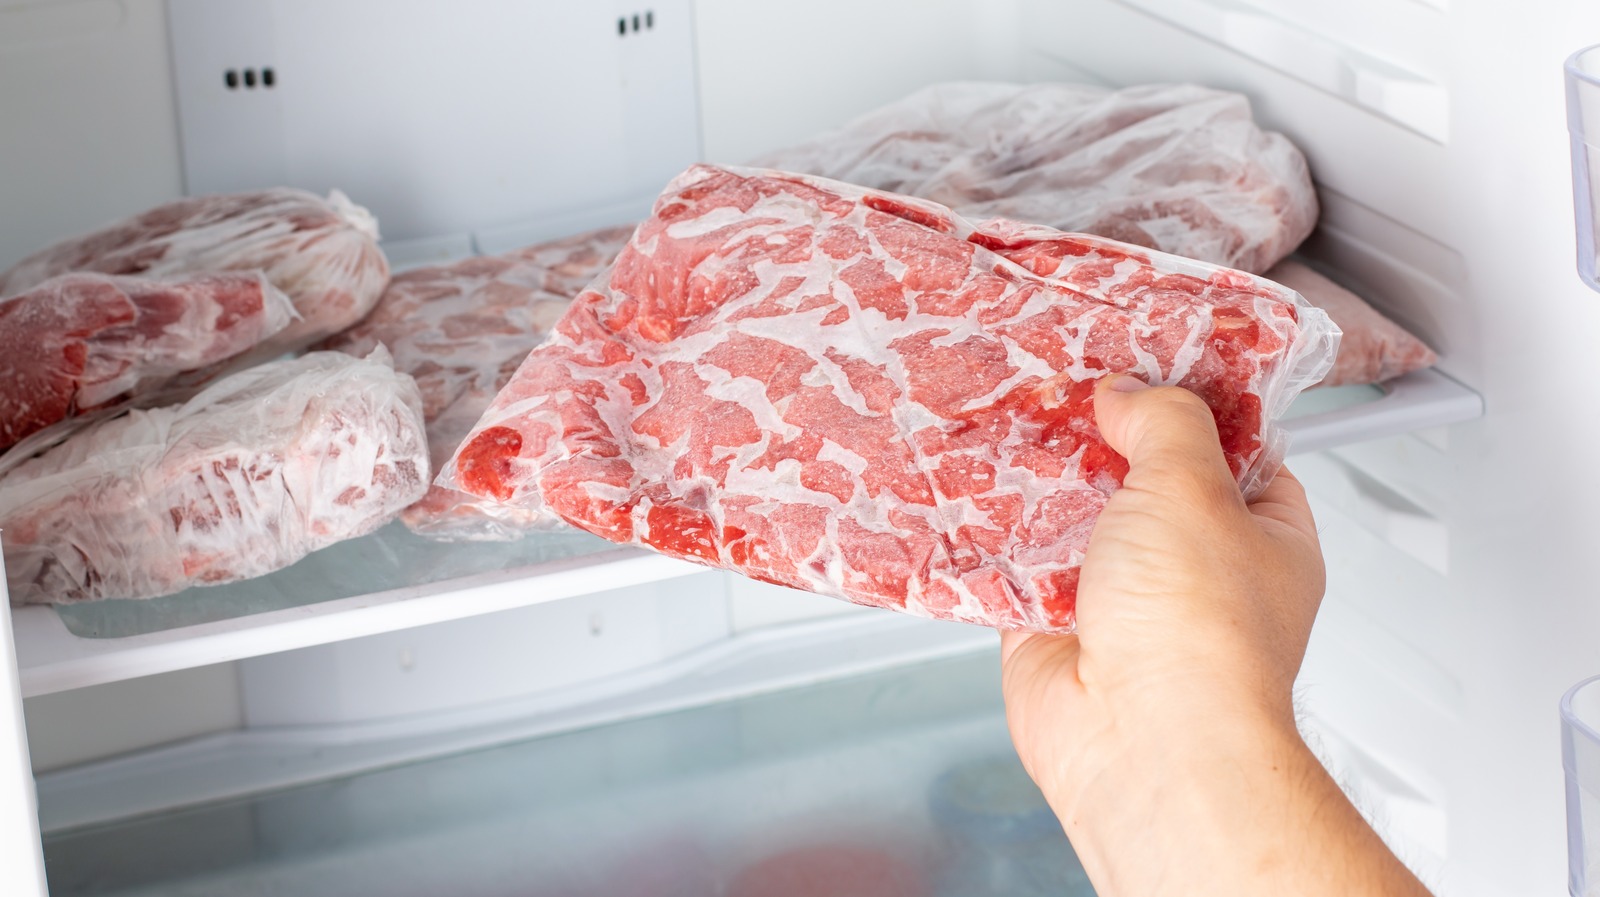 https://www.tastingtable.com/img/gallery/the-biggest-mistakes-people-make-when-defrosting-meat/l-intro-1661865219.jpg